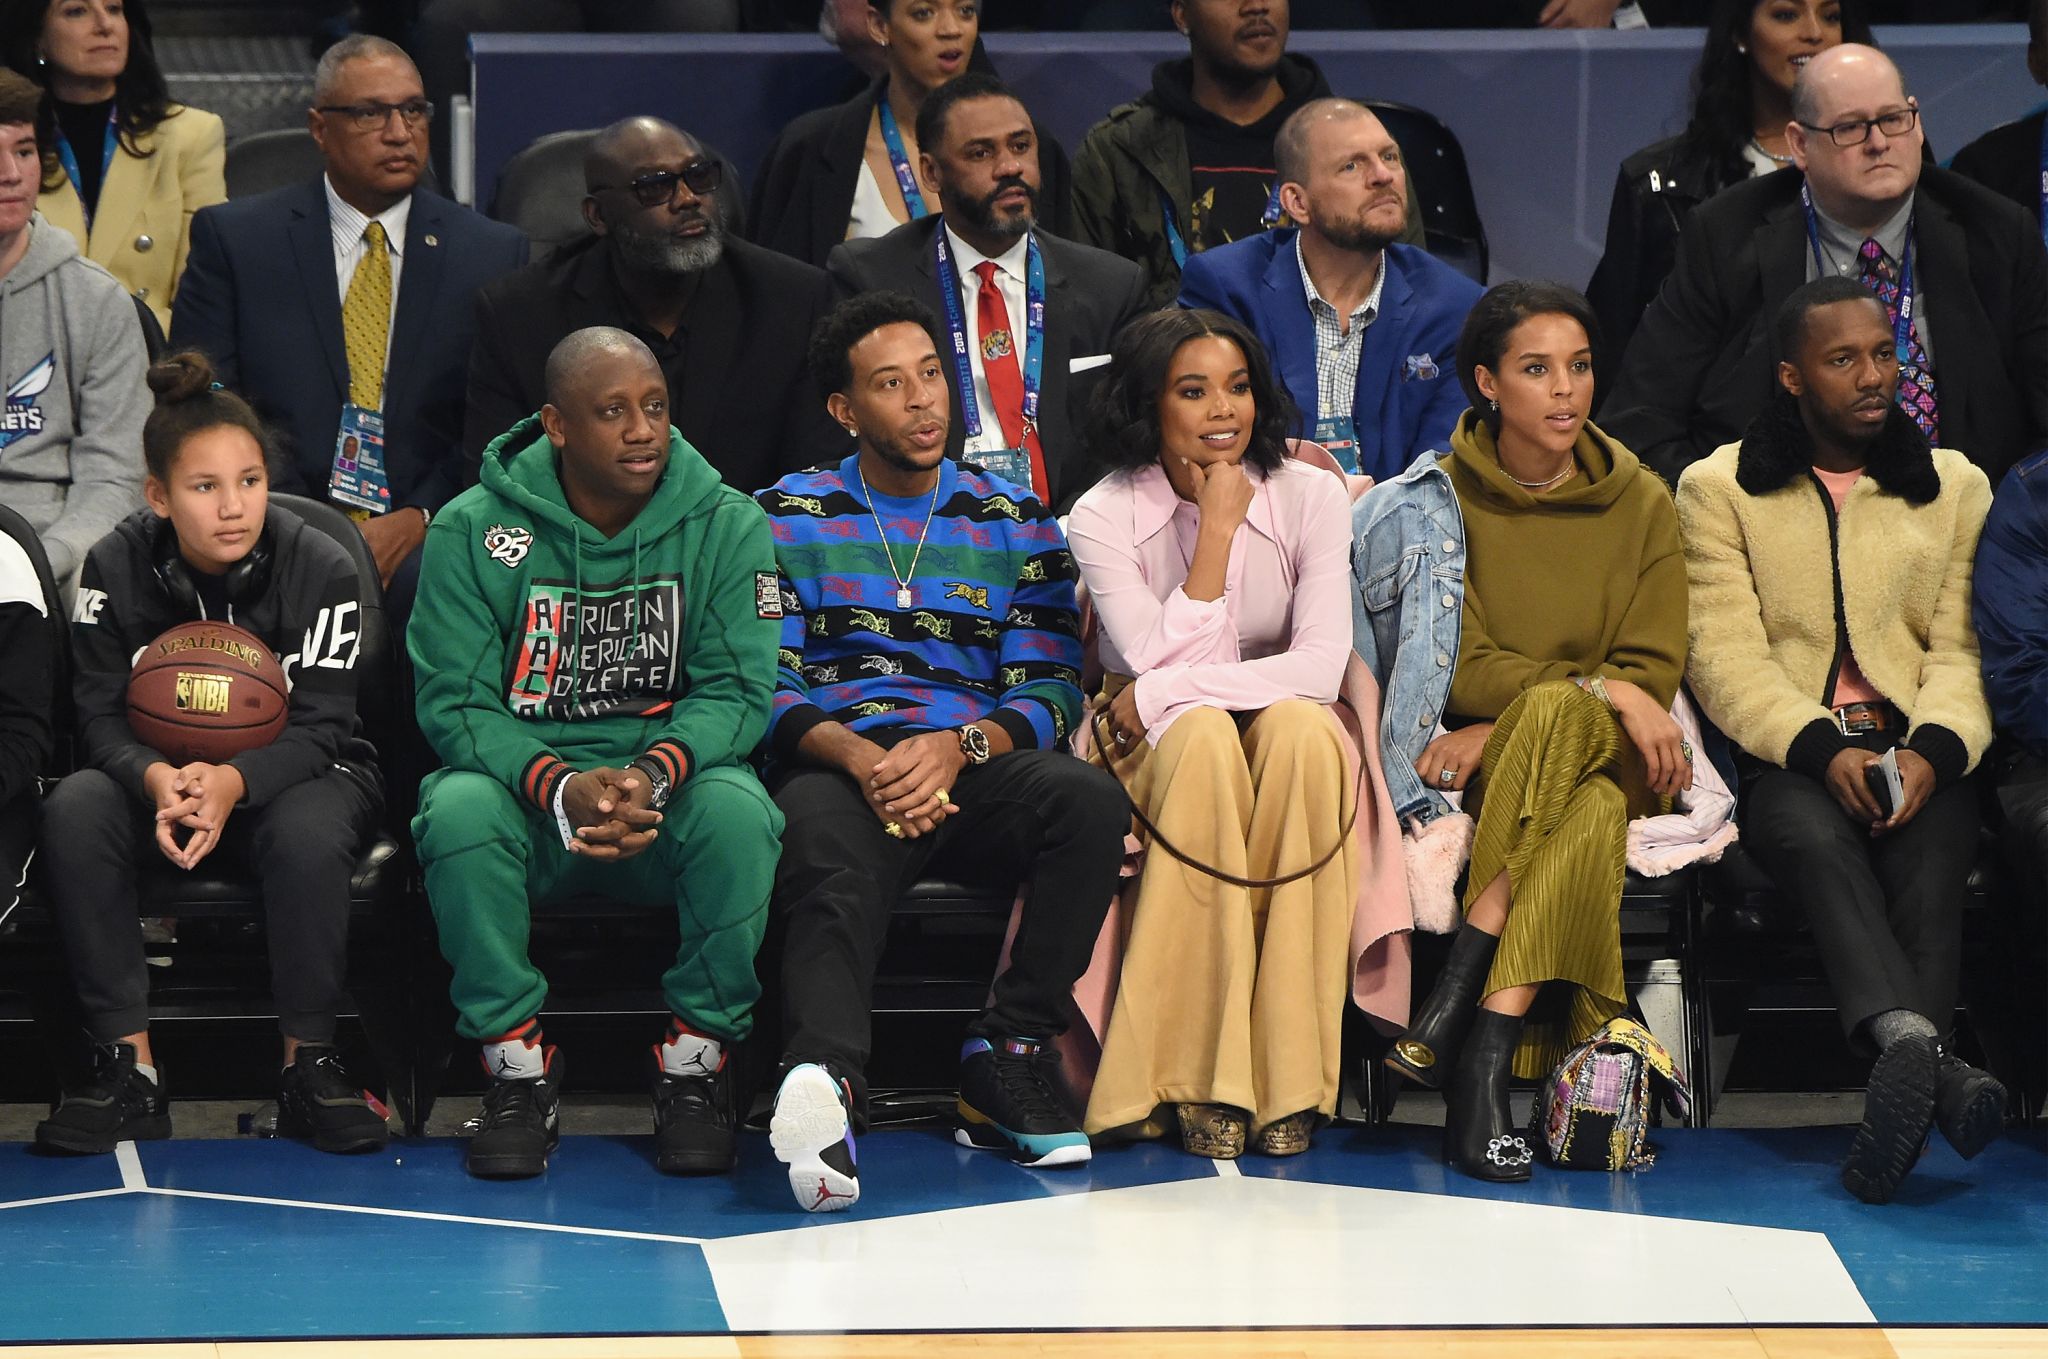 Celebrities sitting courtside at the NBA All-Star Game